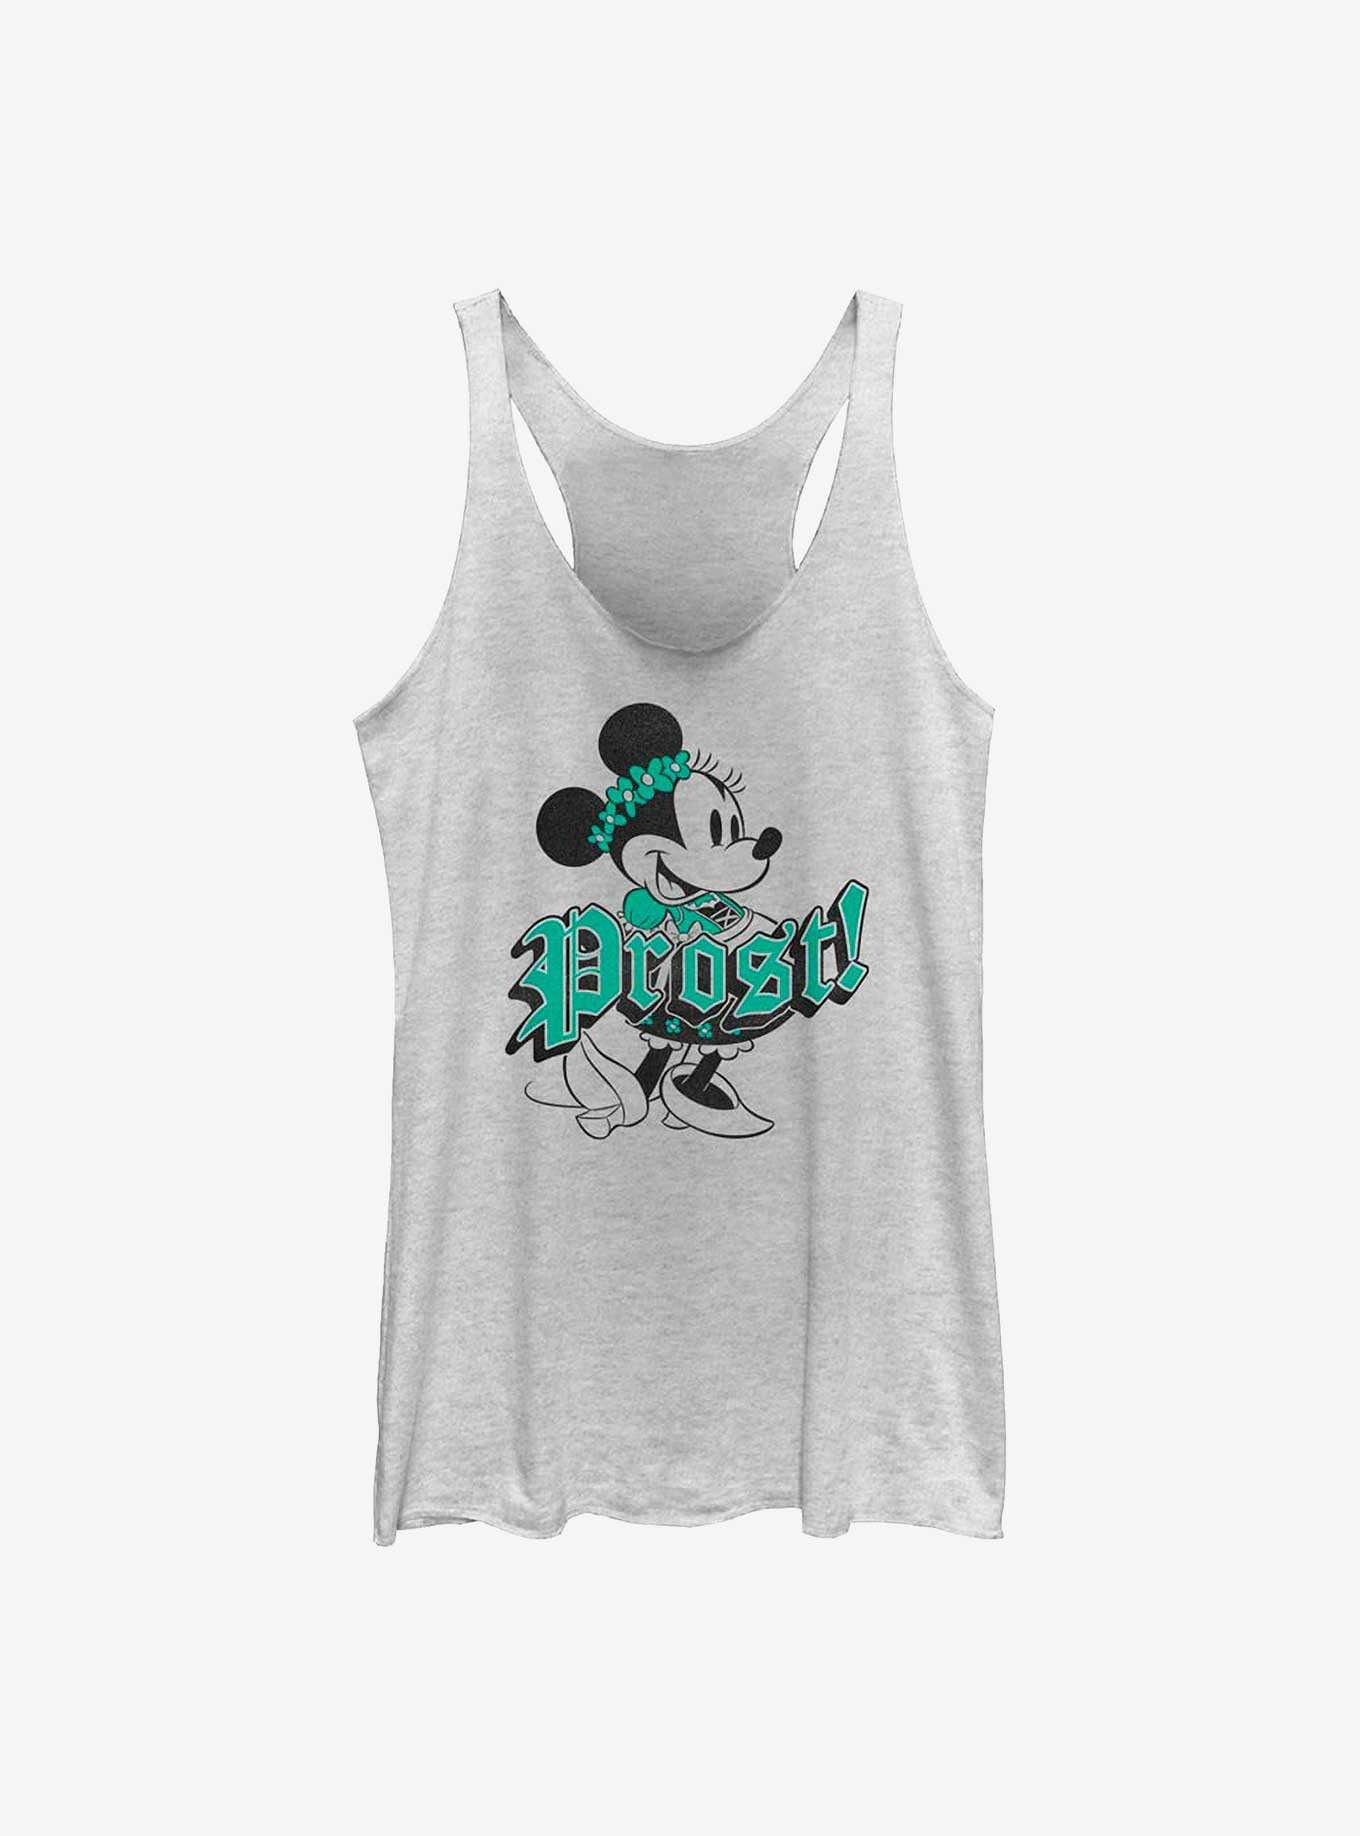 Hot Topic Disney Minnie Mouse Prost Girls Tank